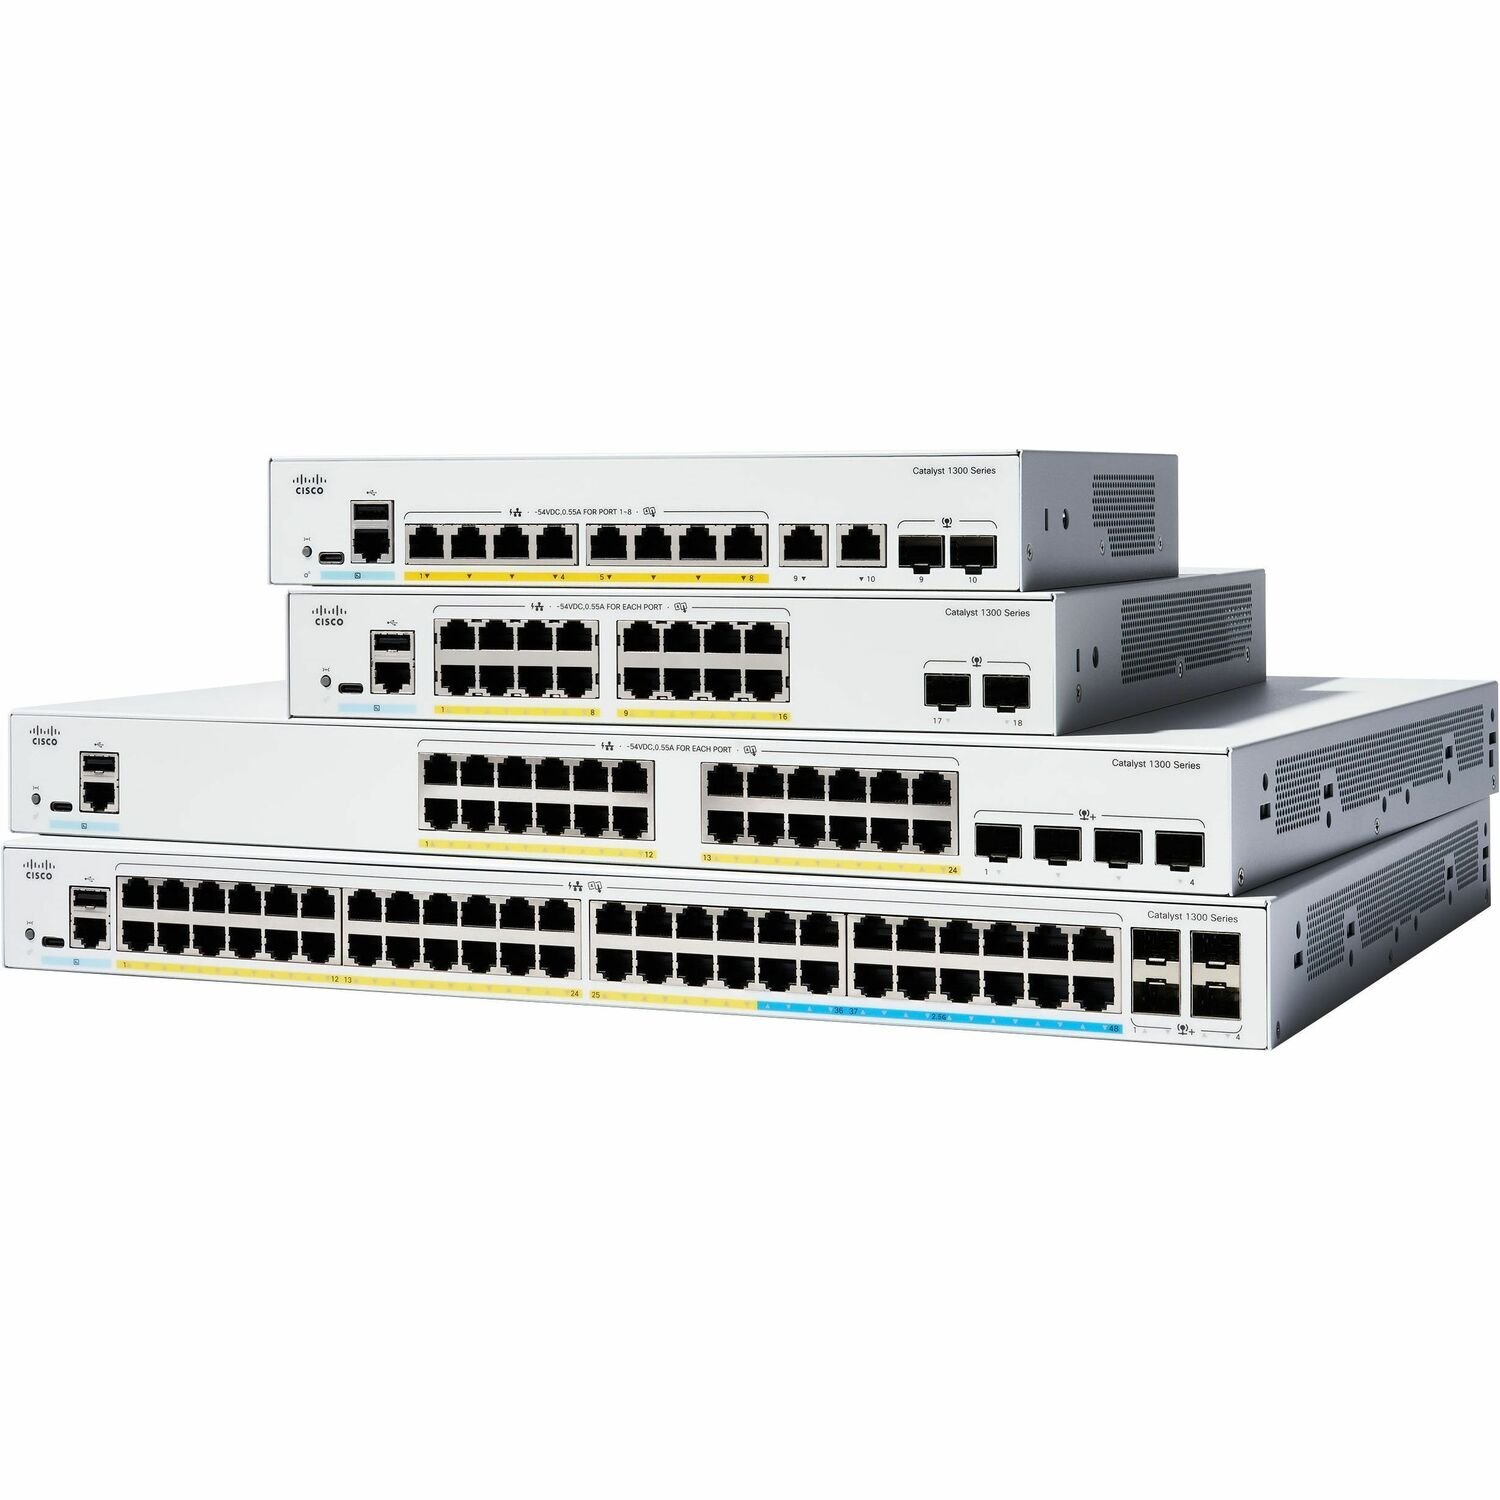 Cisco Catalyst 1300 C1300-8MGP-2X 8 Ports Manageable Layer 3 Switch - Gigabit Ethernet, 2.5 Gigabit Ethernet, 10 Gigabit Ethernet - 10/100/1000Base-T, 2.5GBase-T, 10GBase-X - White